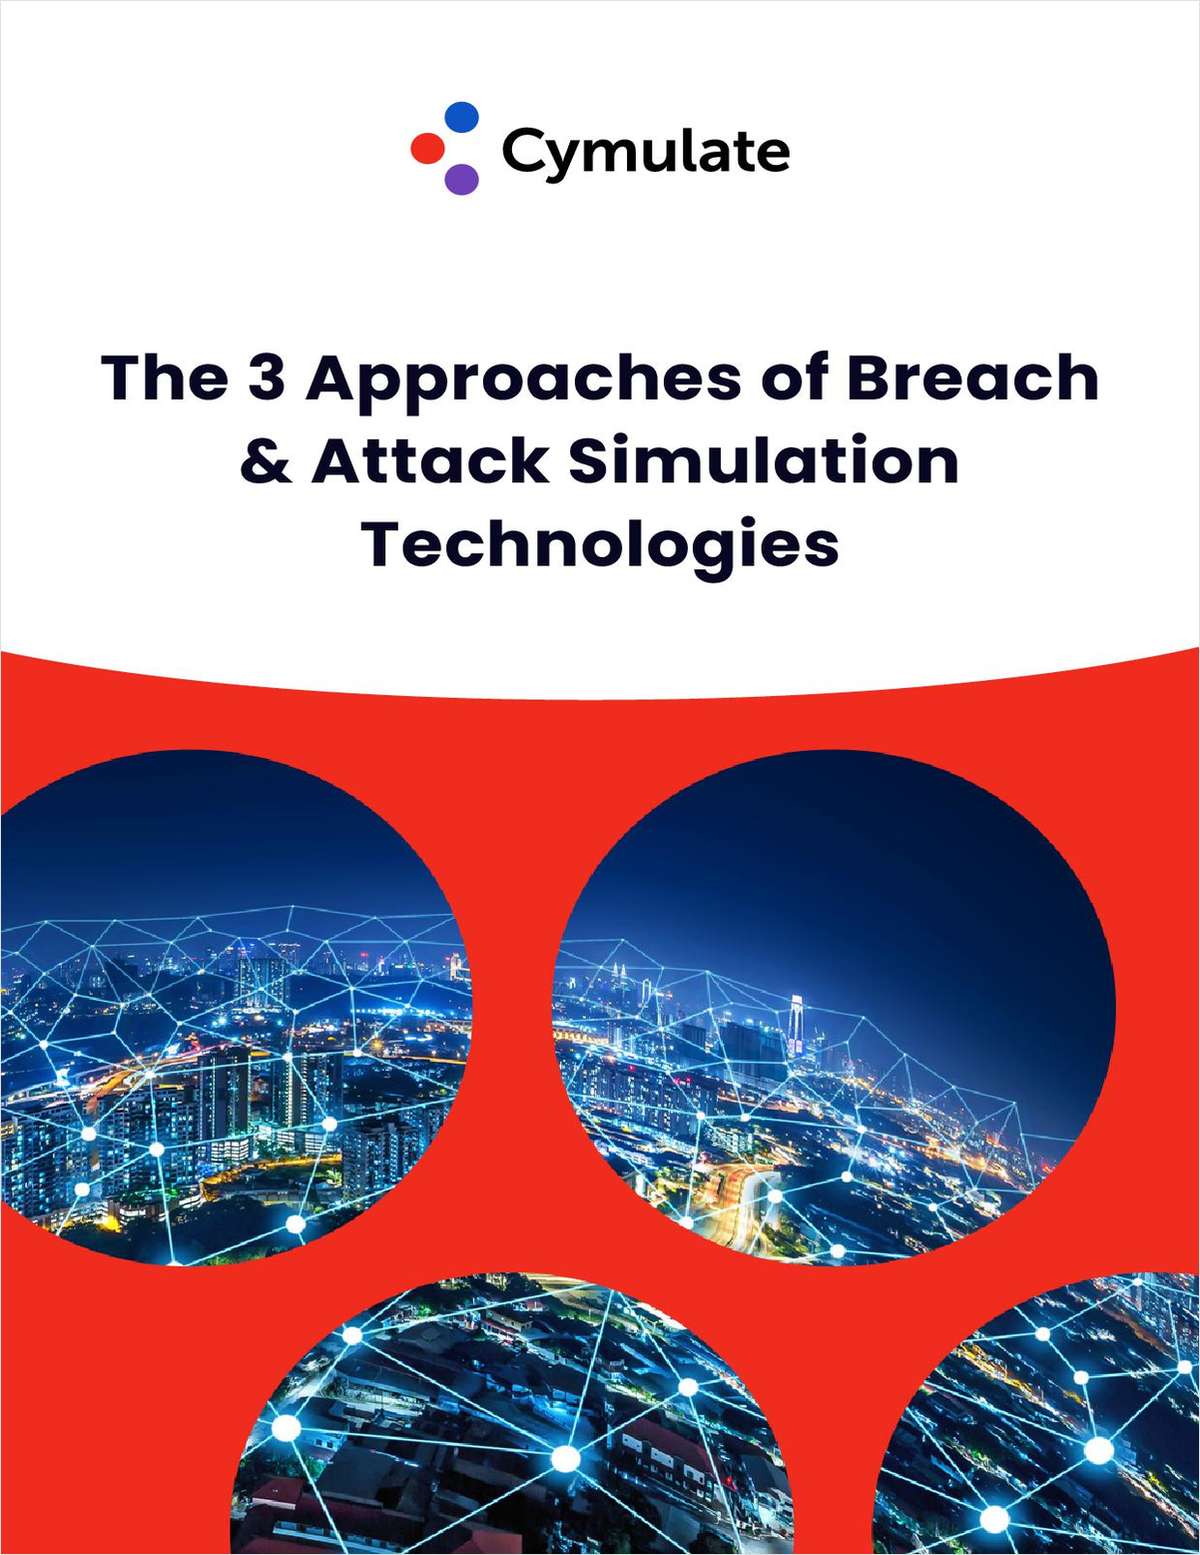 The 3 Approaches to Breach & Attack Simulation Technologies